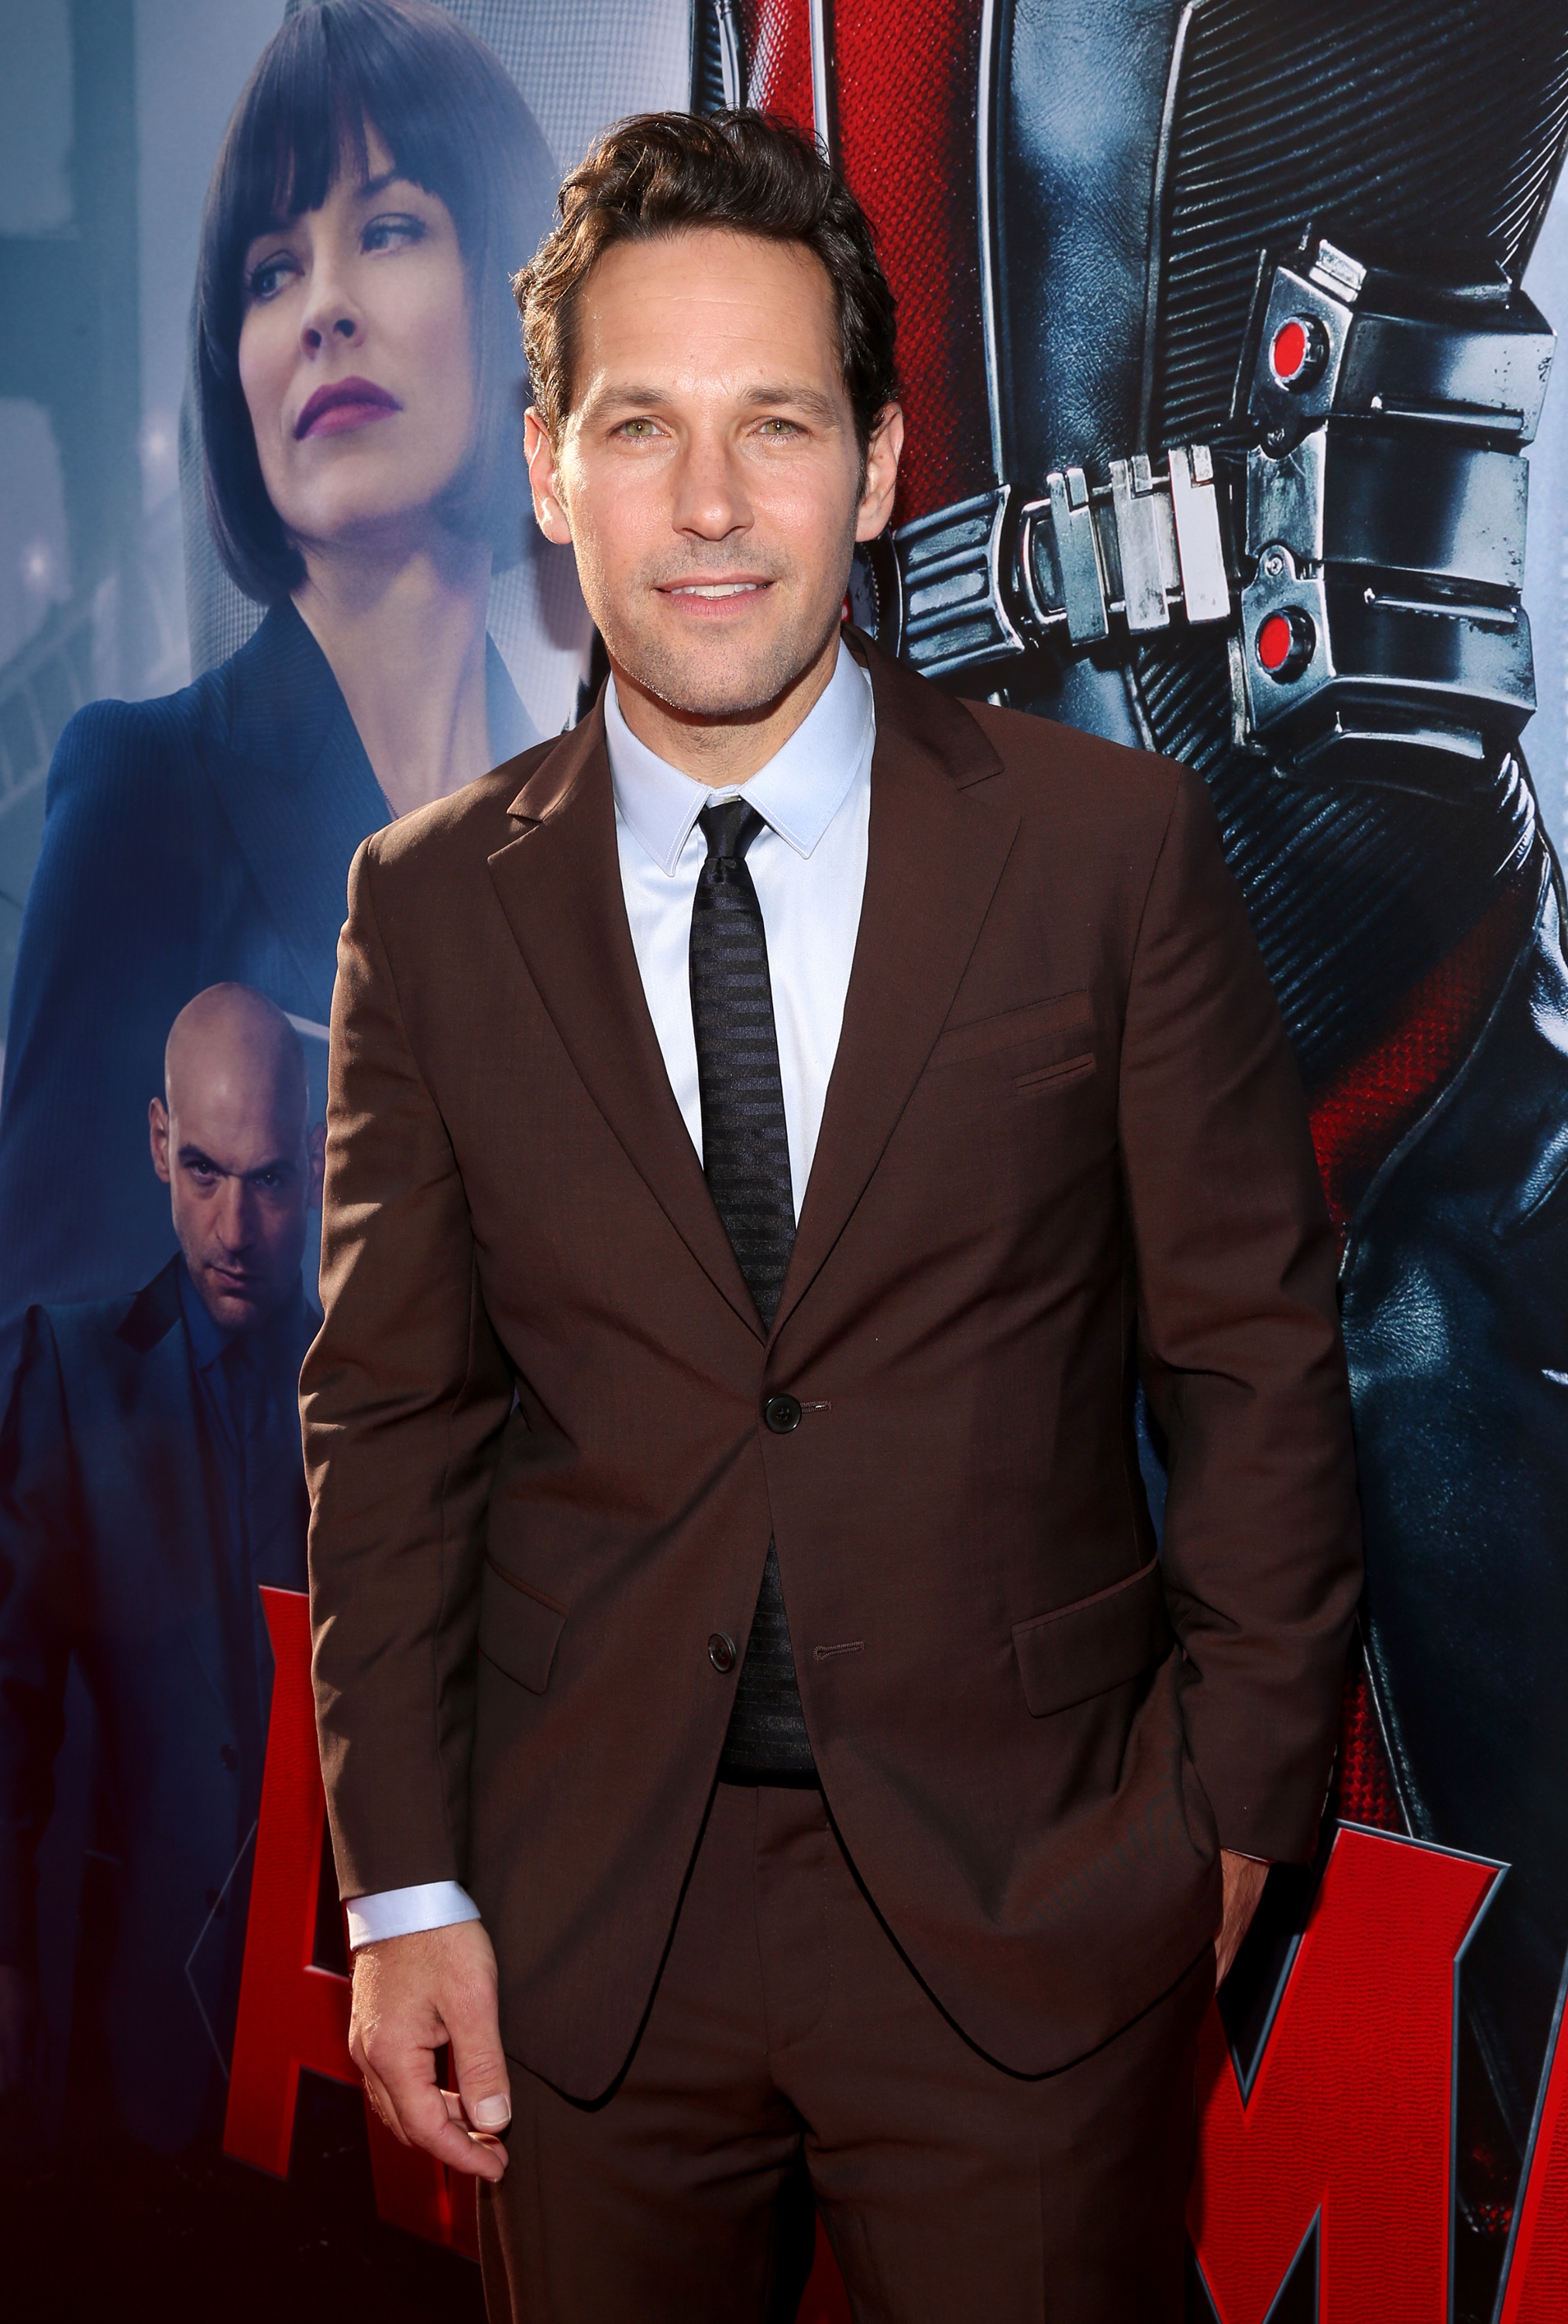 The World Premiere Of Marvel's "AntMan" Red Carpet Horsing Around